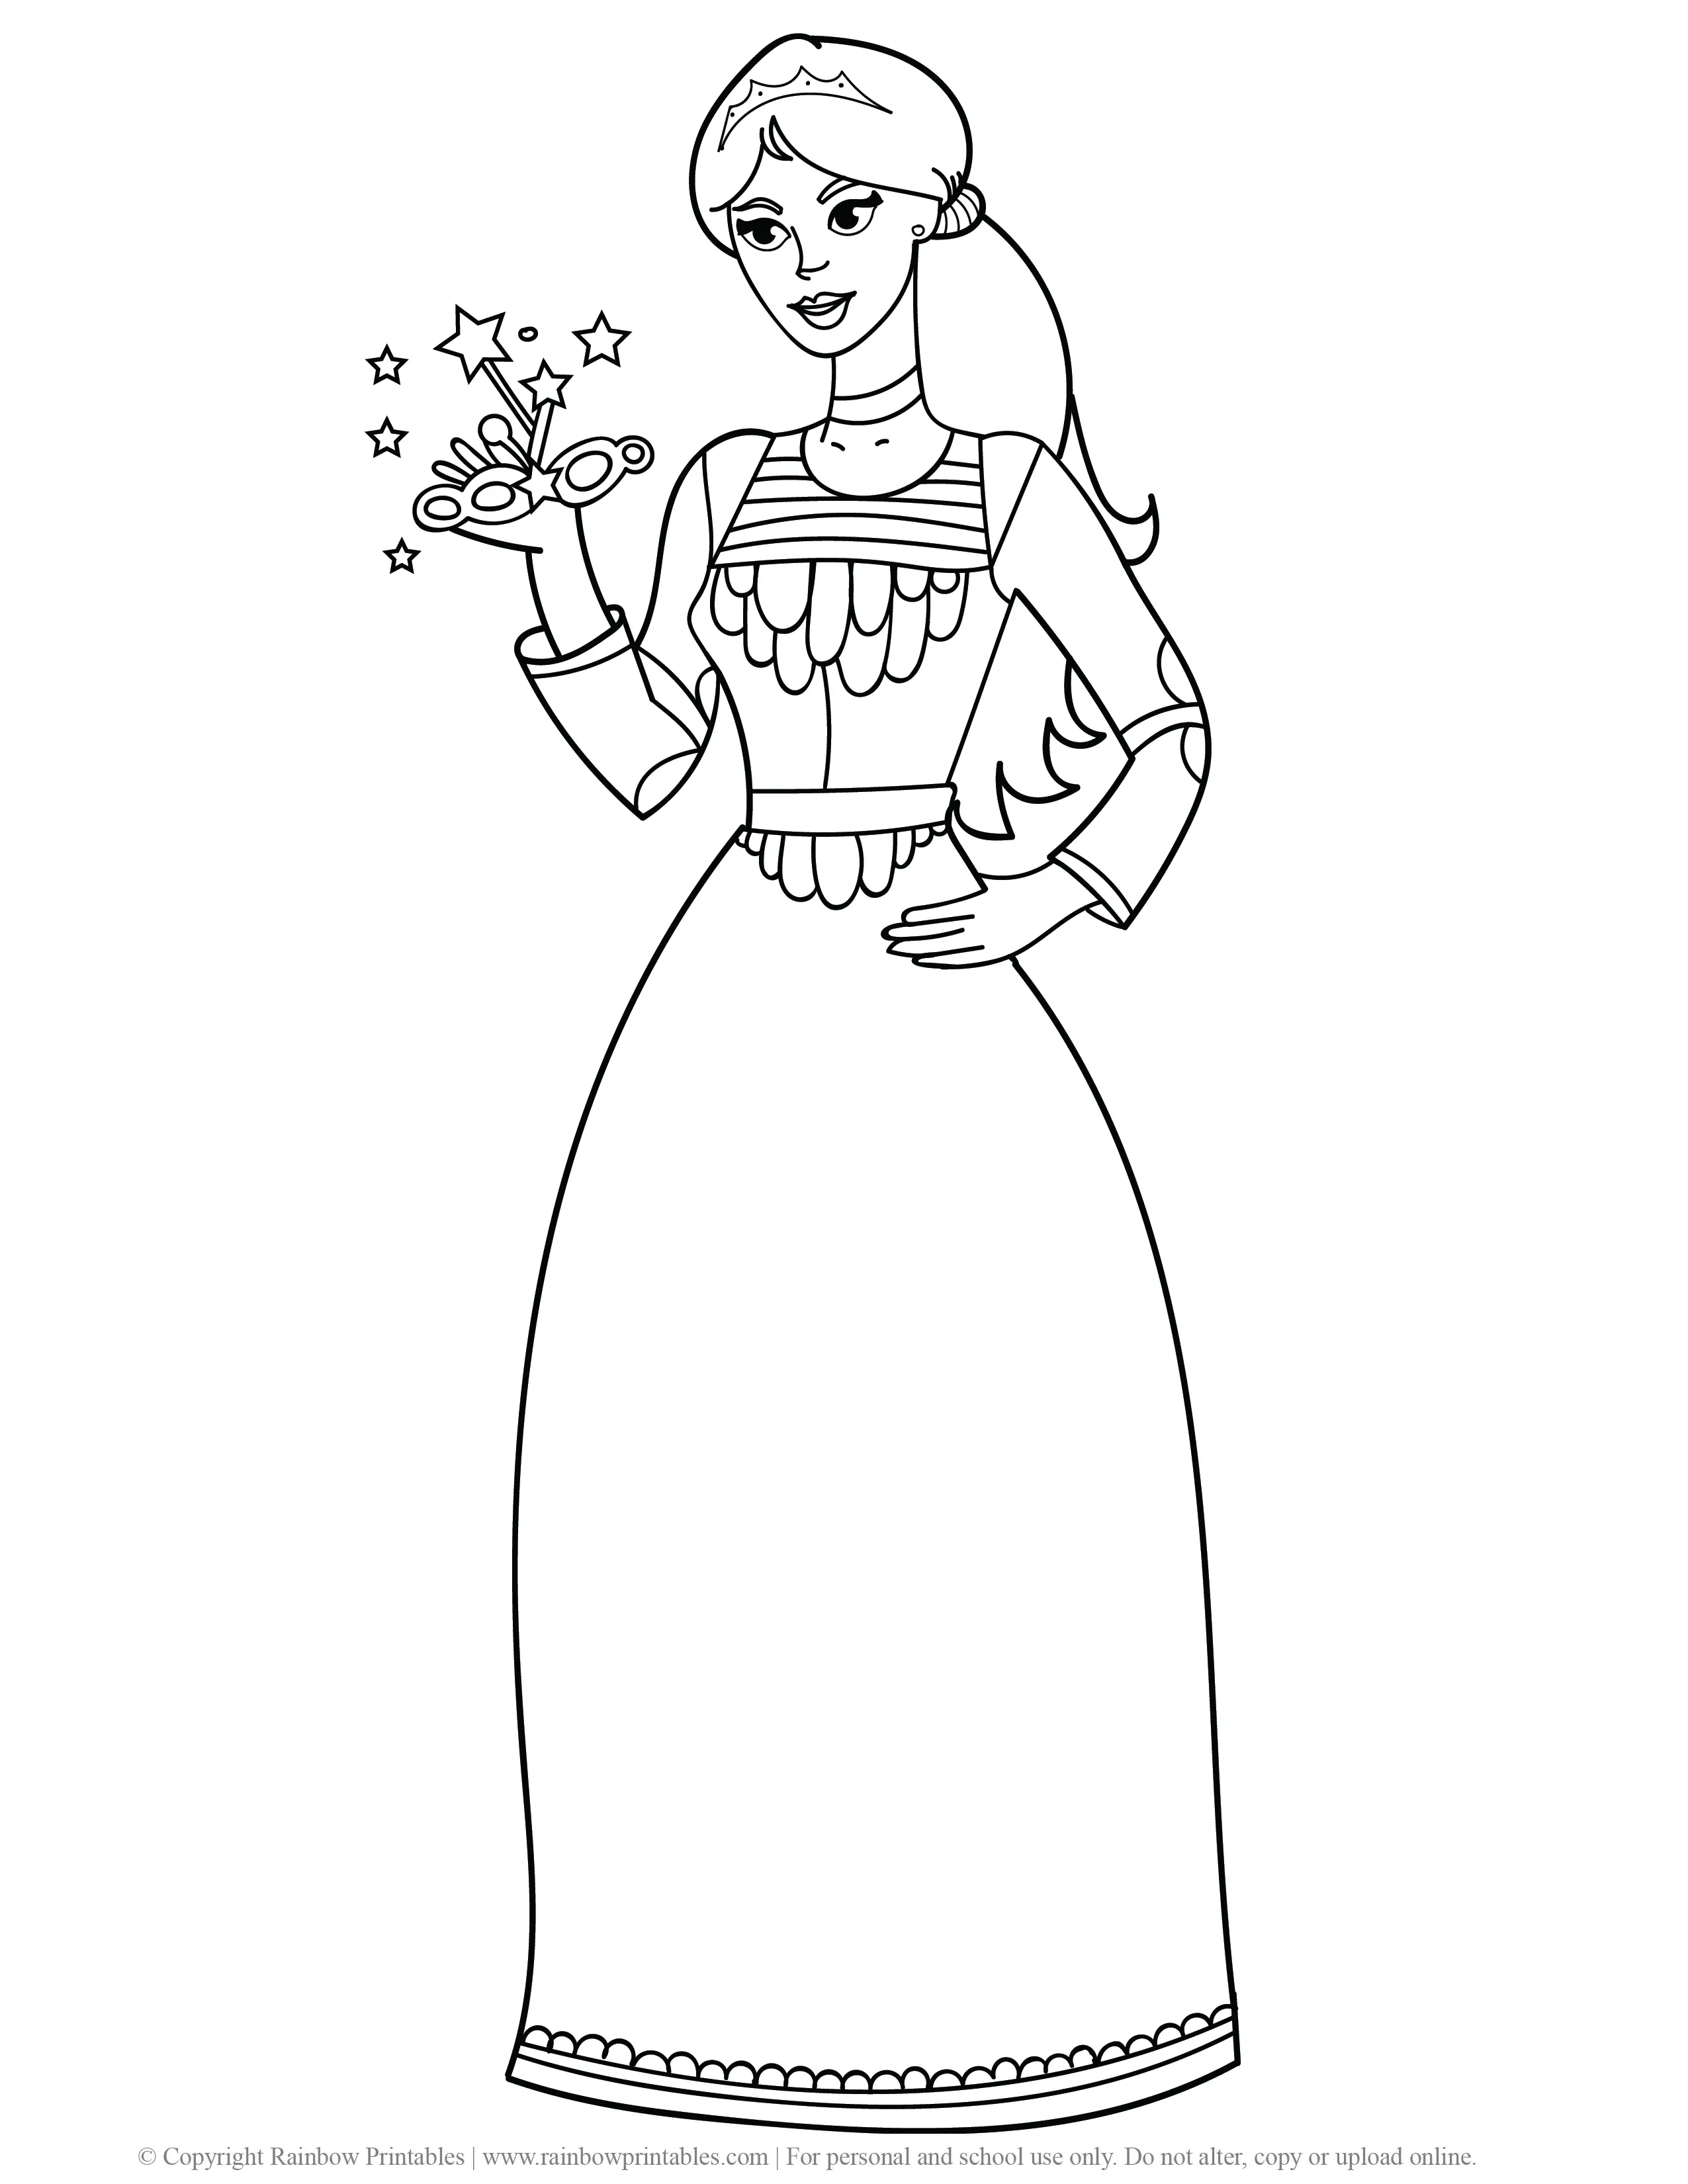 Cute Princess Coloring Pages for Girls   Rainbow Printables